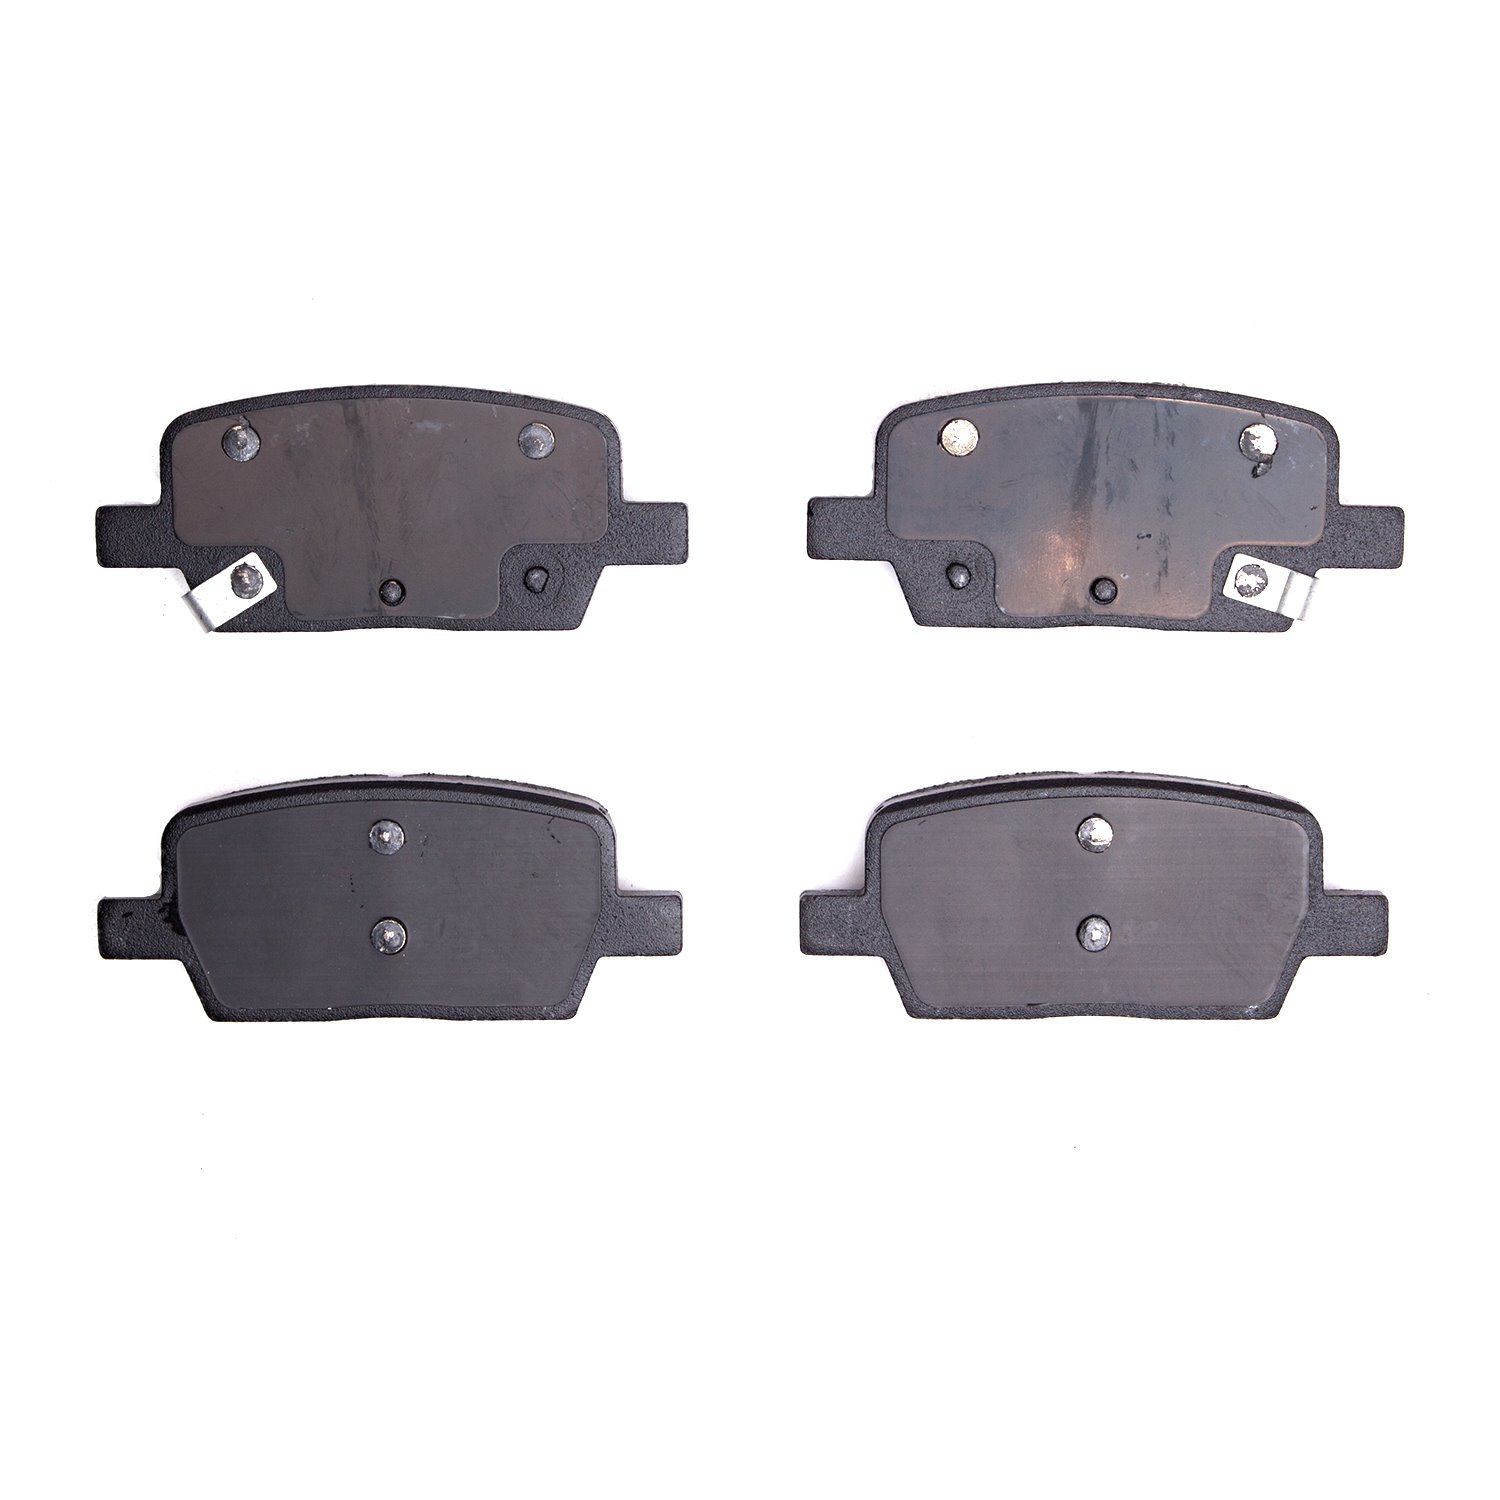 1310-1914-00 3000-Series Ceramic Brake Pads, Fits Select GM, Position: Rear